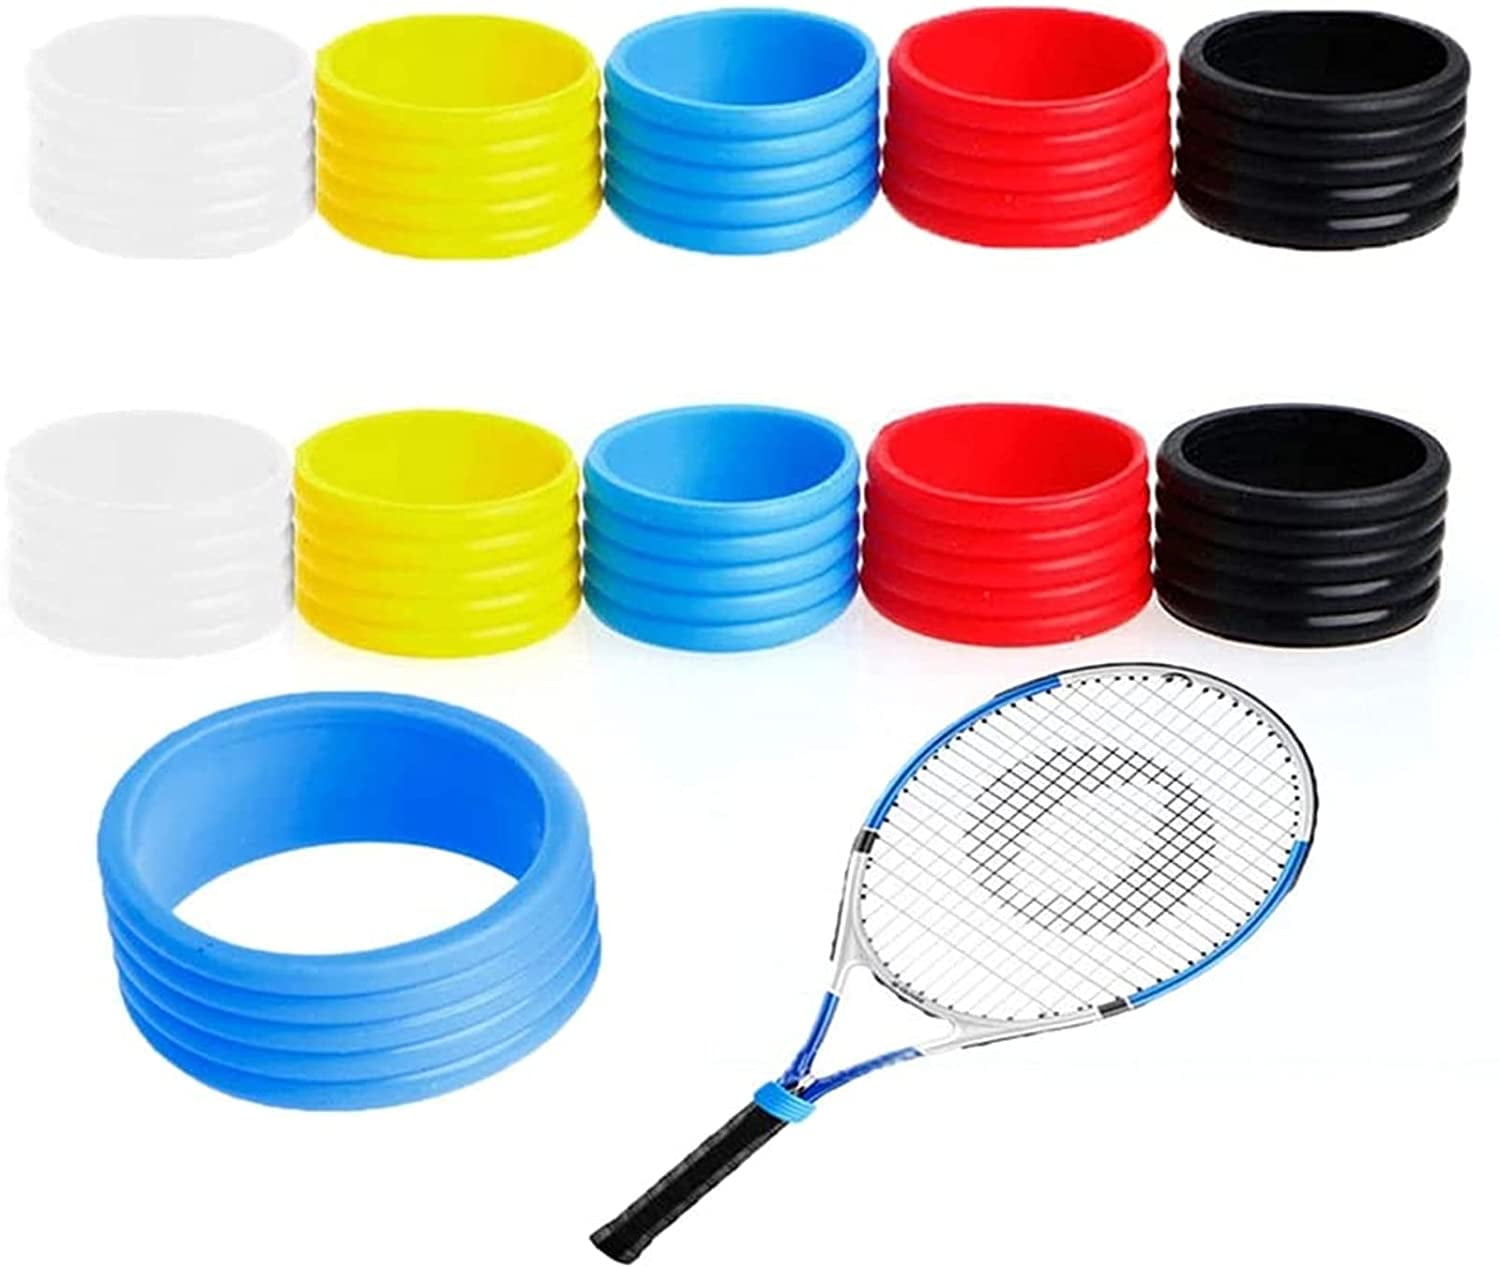 VISION CLEAR 1 SET RACQUETBALL REPLACEMENT TACKY GRIP for RACQUETBALL Racquet 